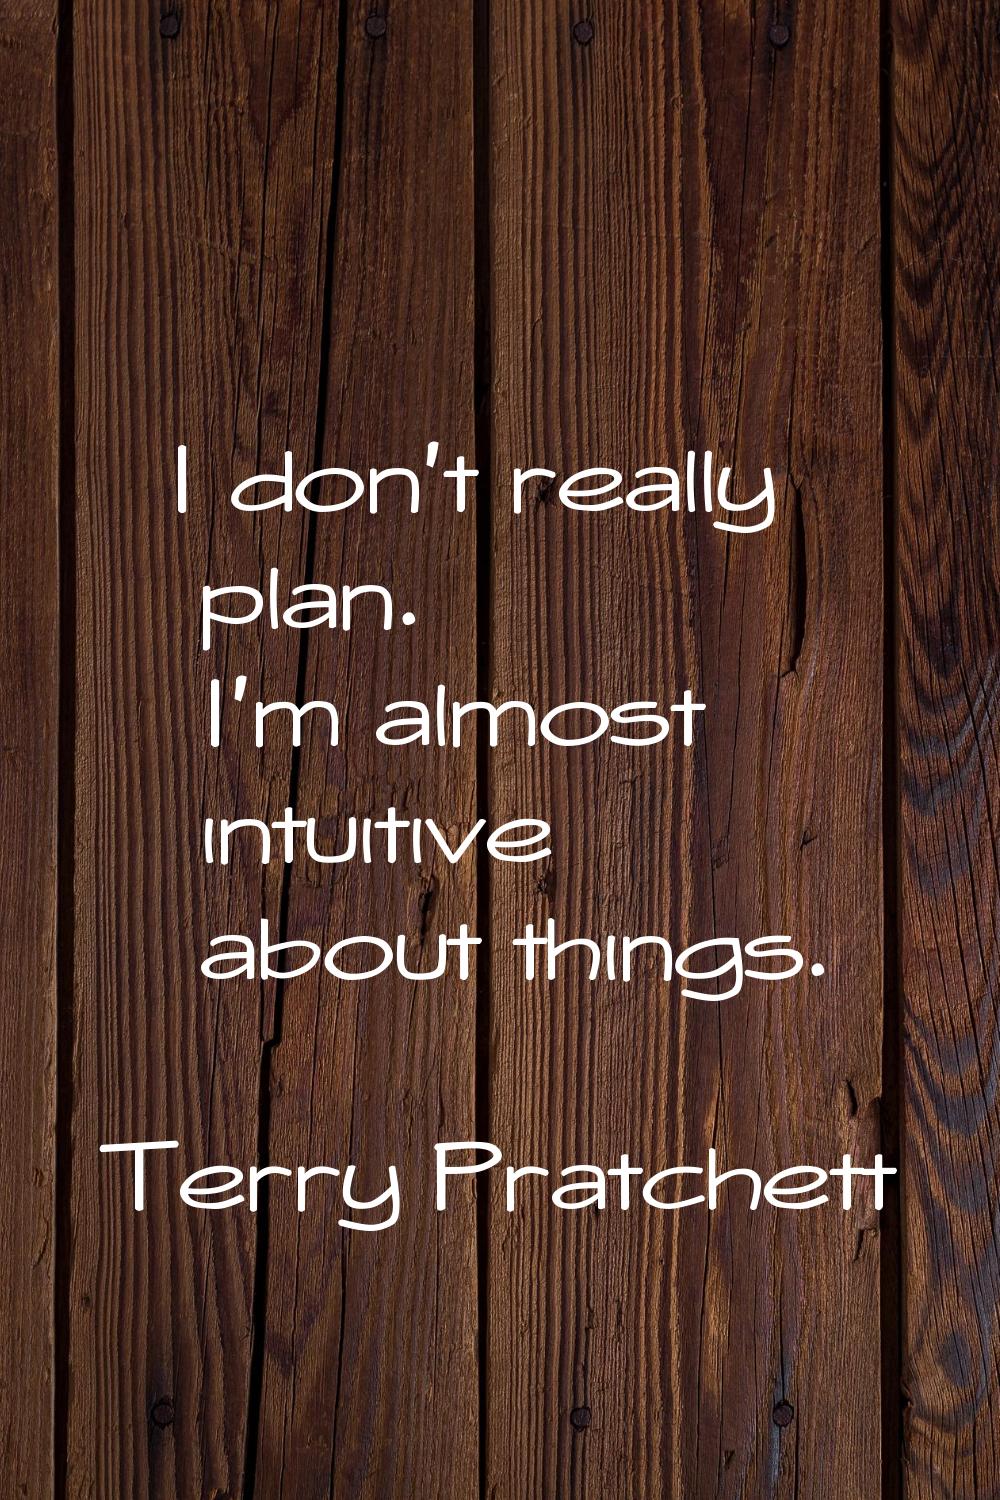 I don't really plan. I'm almost intuitive about things.